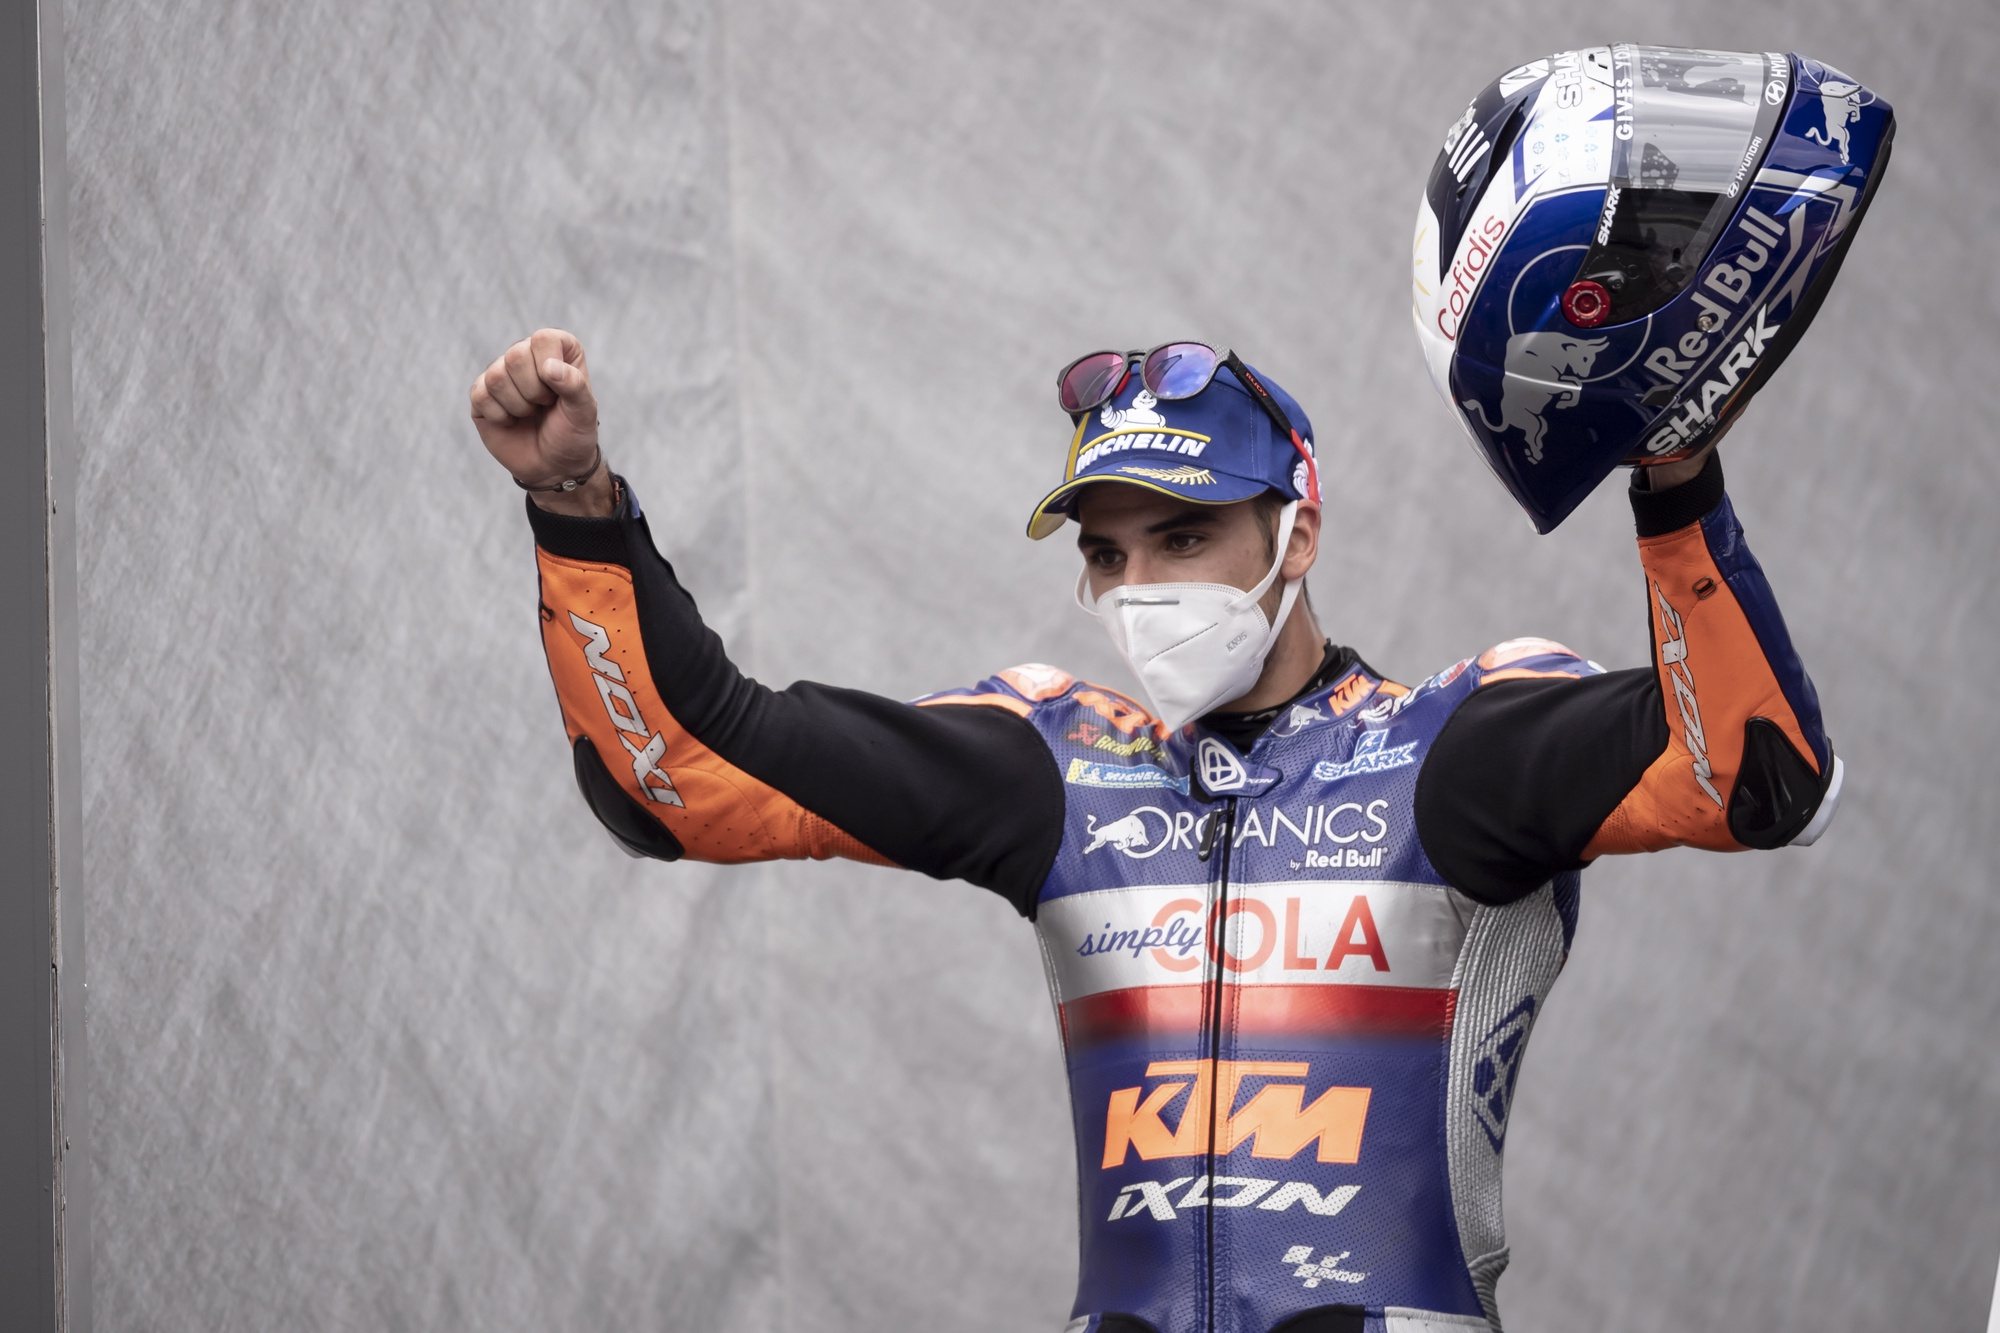 epa08619758 First placed Portuguese MotoGP rider Miguel Oliveira of Red Bull KTM Tech 3 celebrates on the podium after the Motorcycling Grand Prix of Styria at the Red Bull Ring in Spielberg, Austria, 23 August 2020.  EPA/CHRISTIAN BRUNA